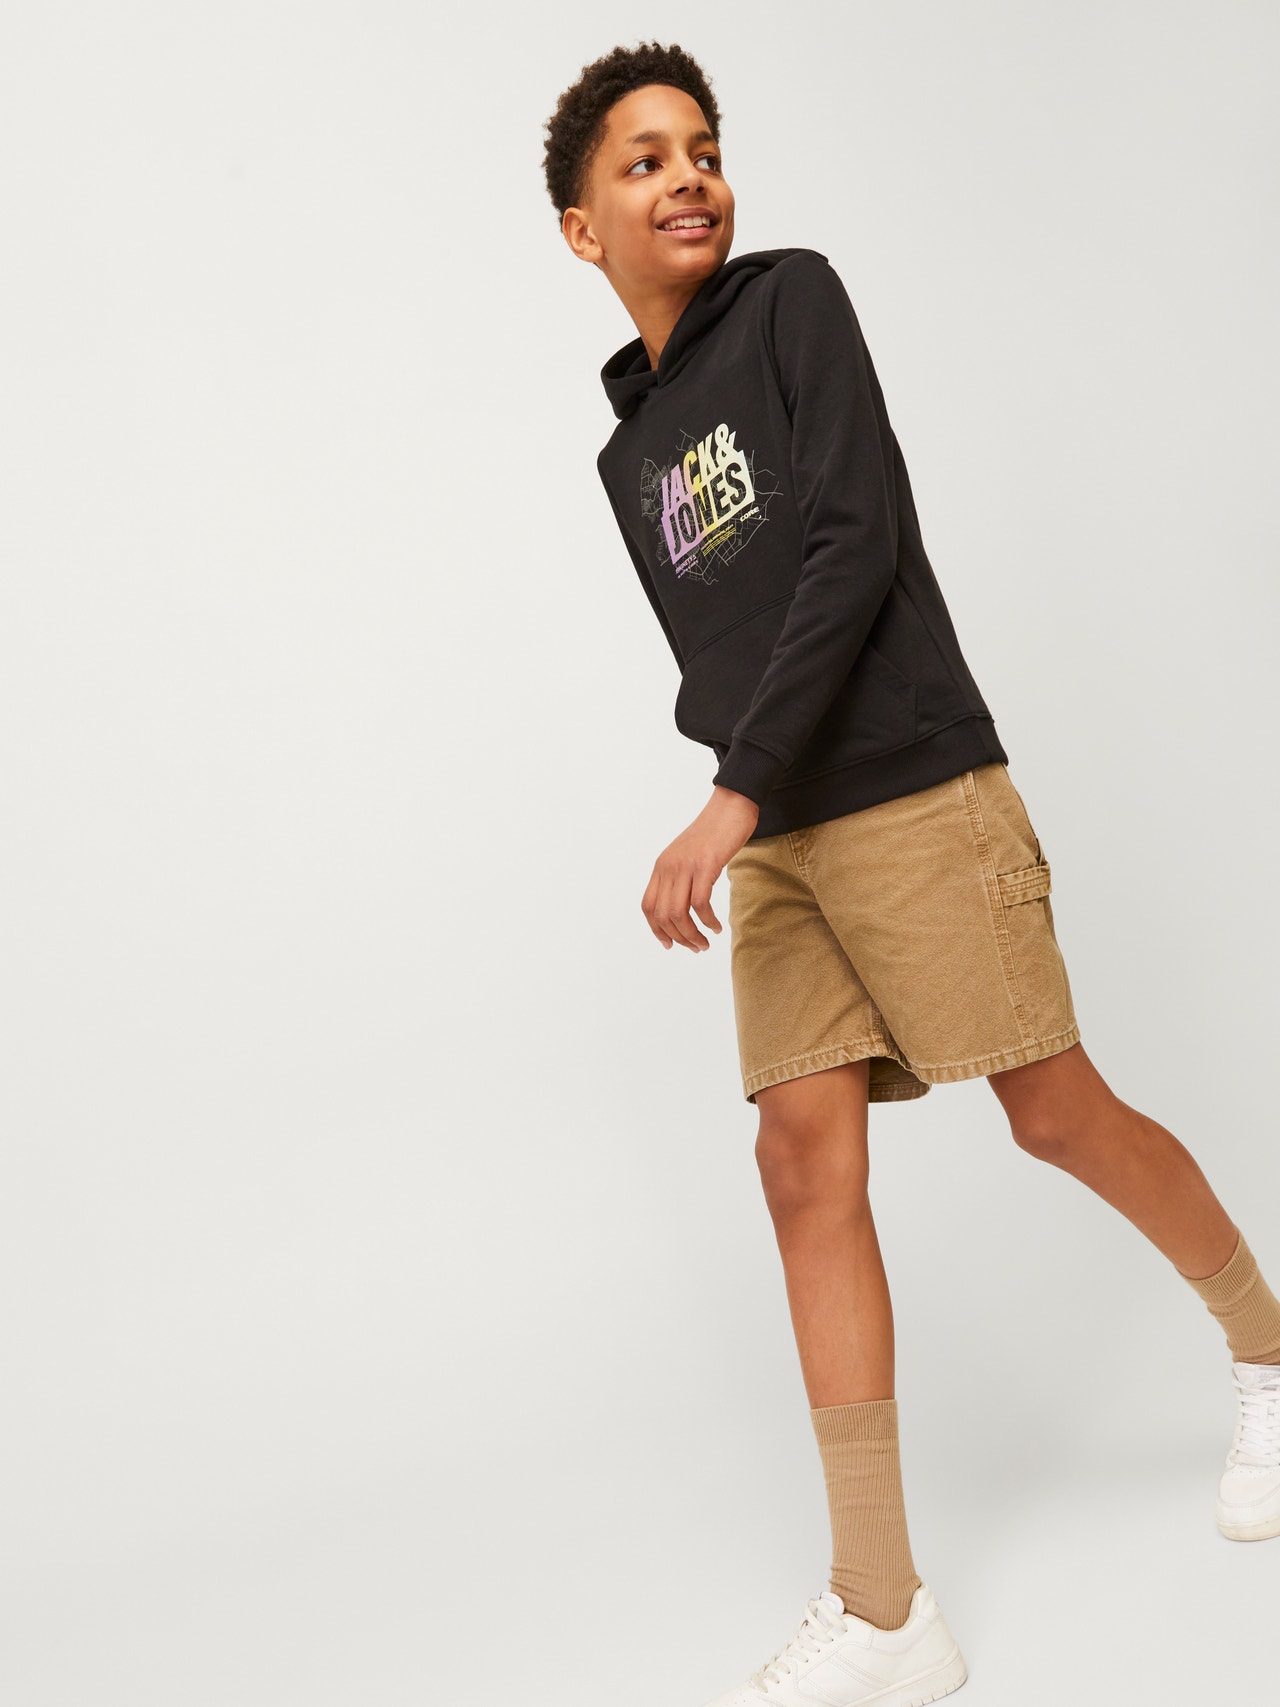 Jack & Jones Baggy fit Baggy fit shorts For boys -Tigers Eye - 12252760